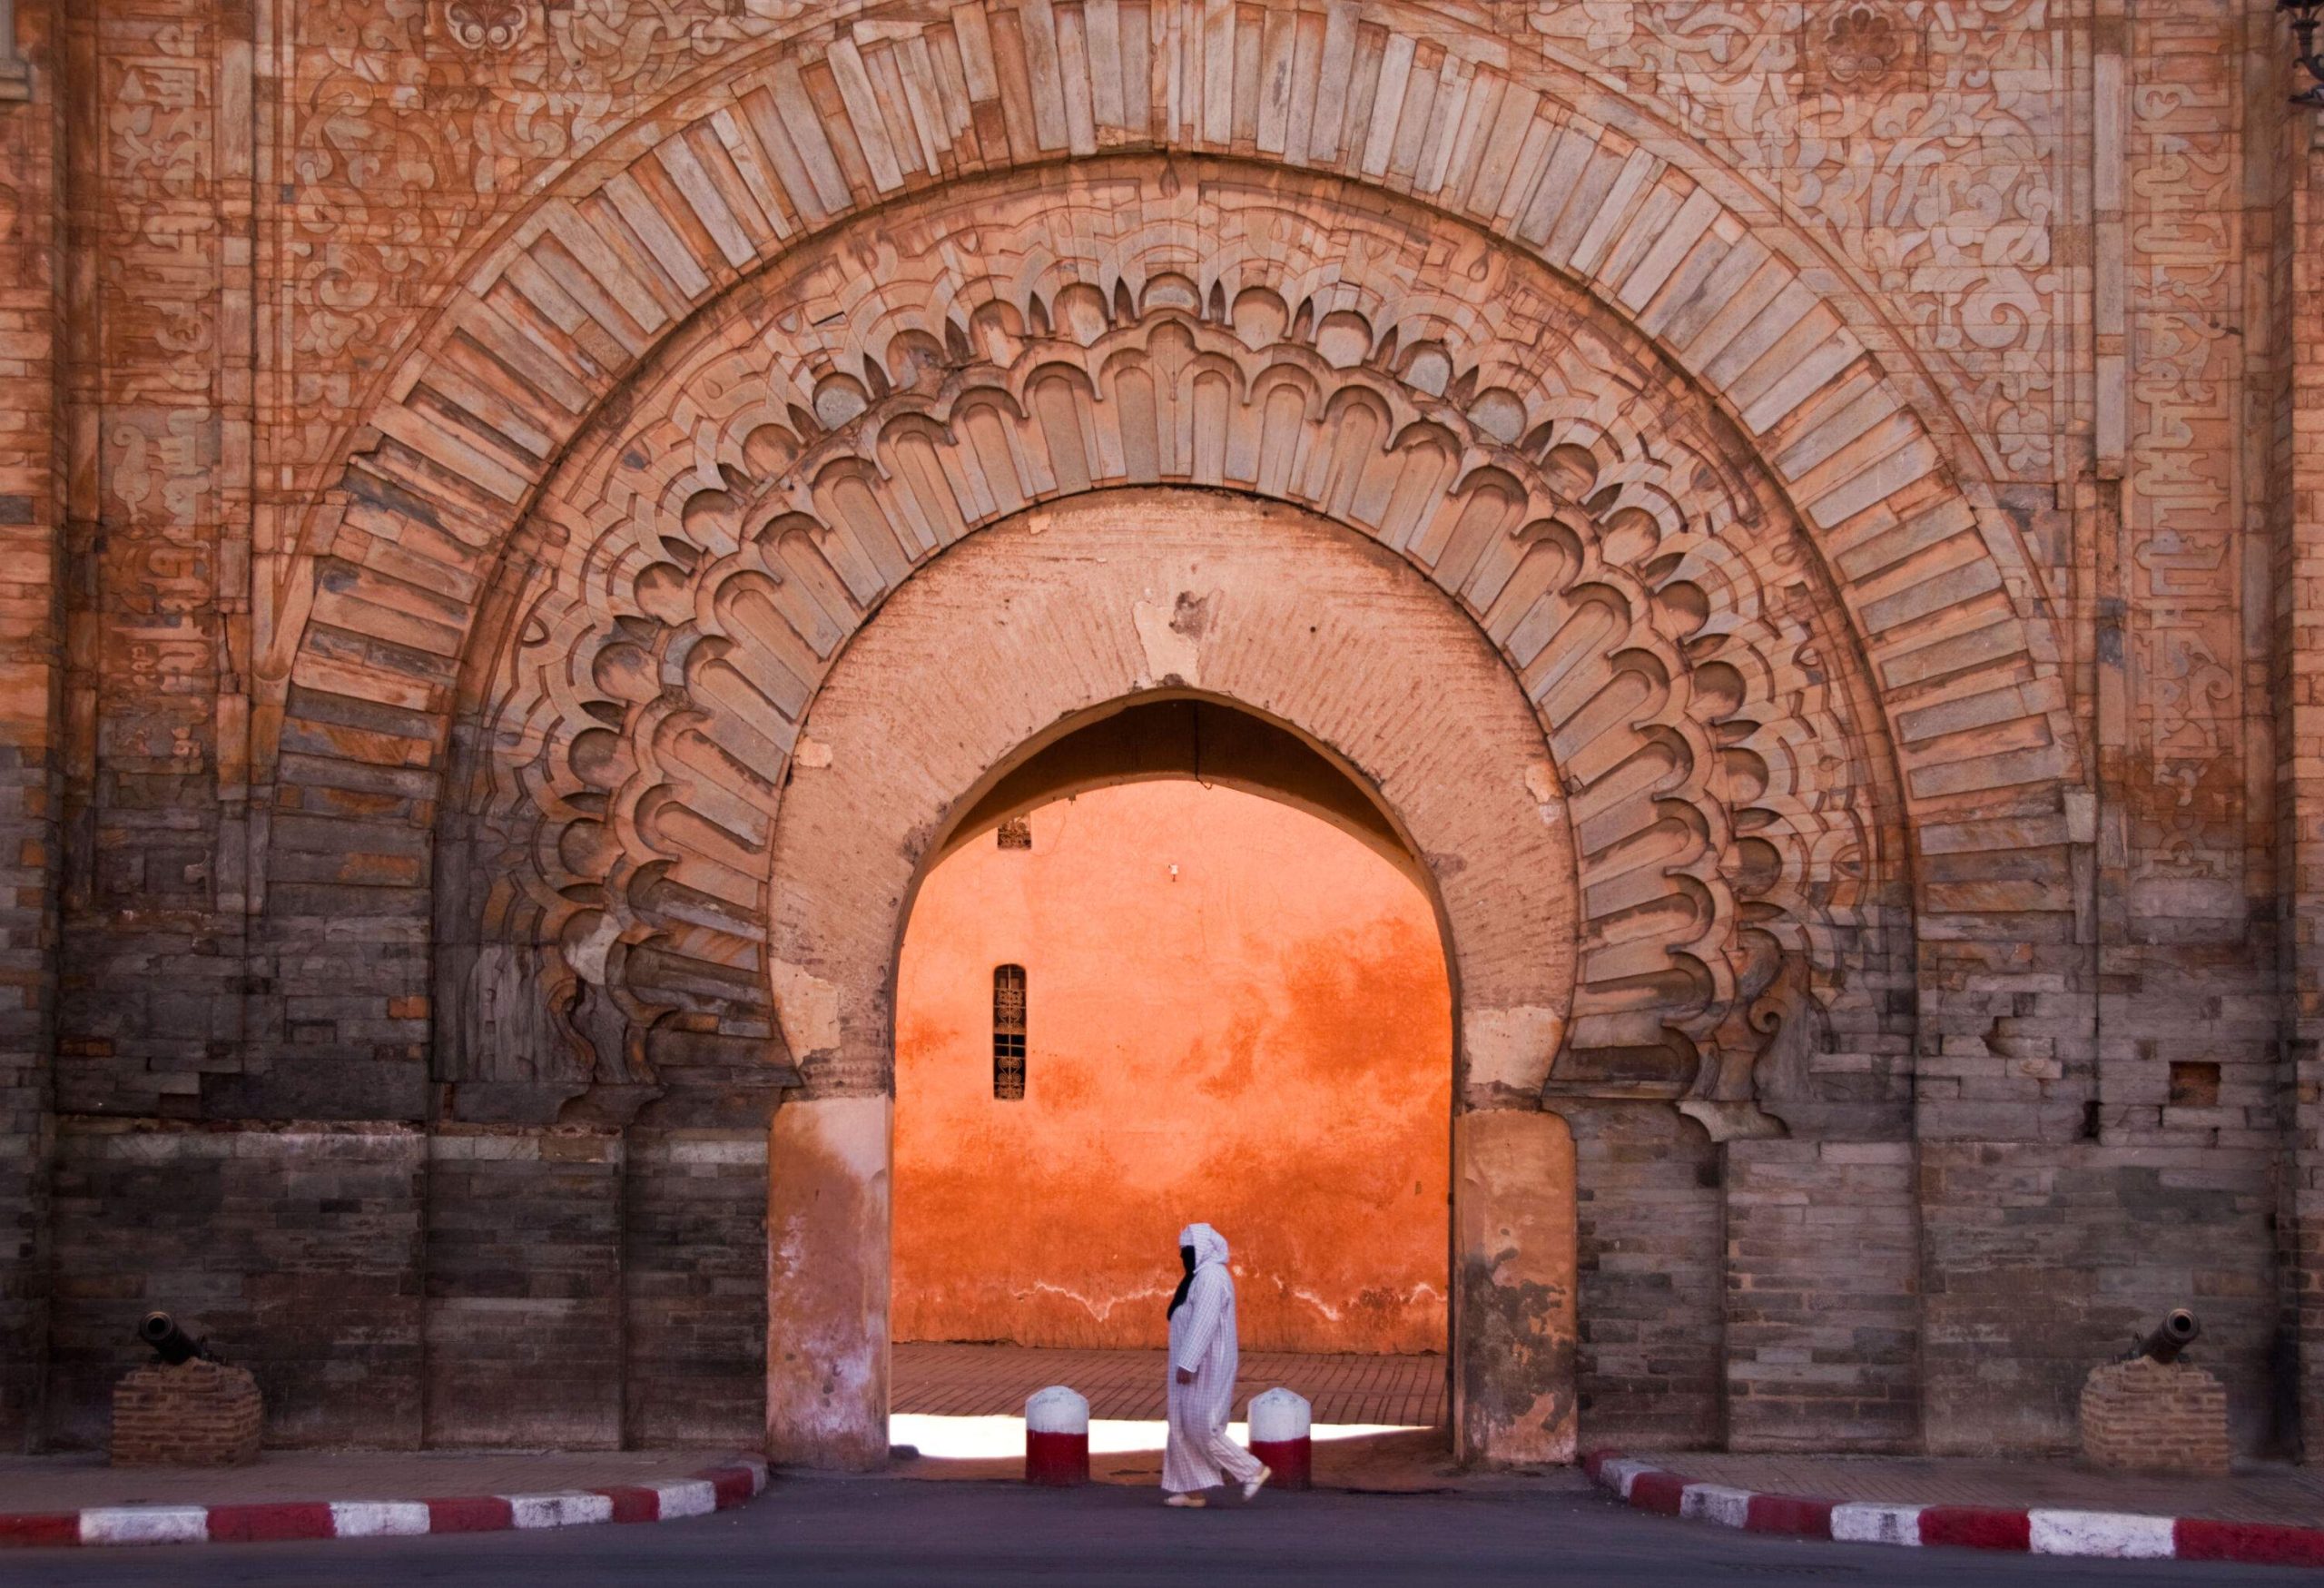 An individual in traditional white Arab clothing passing by an ornated arched gate.